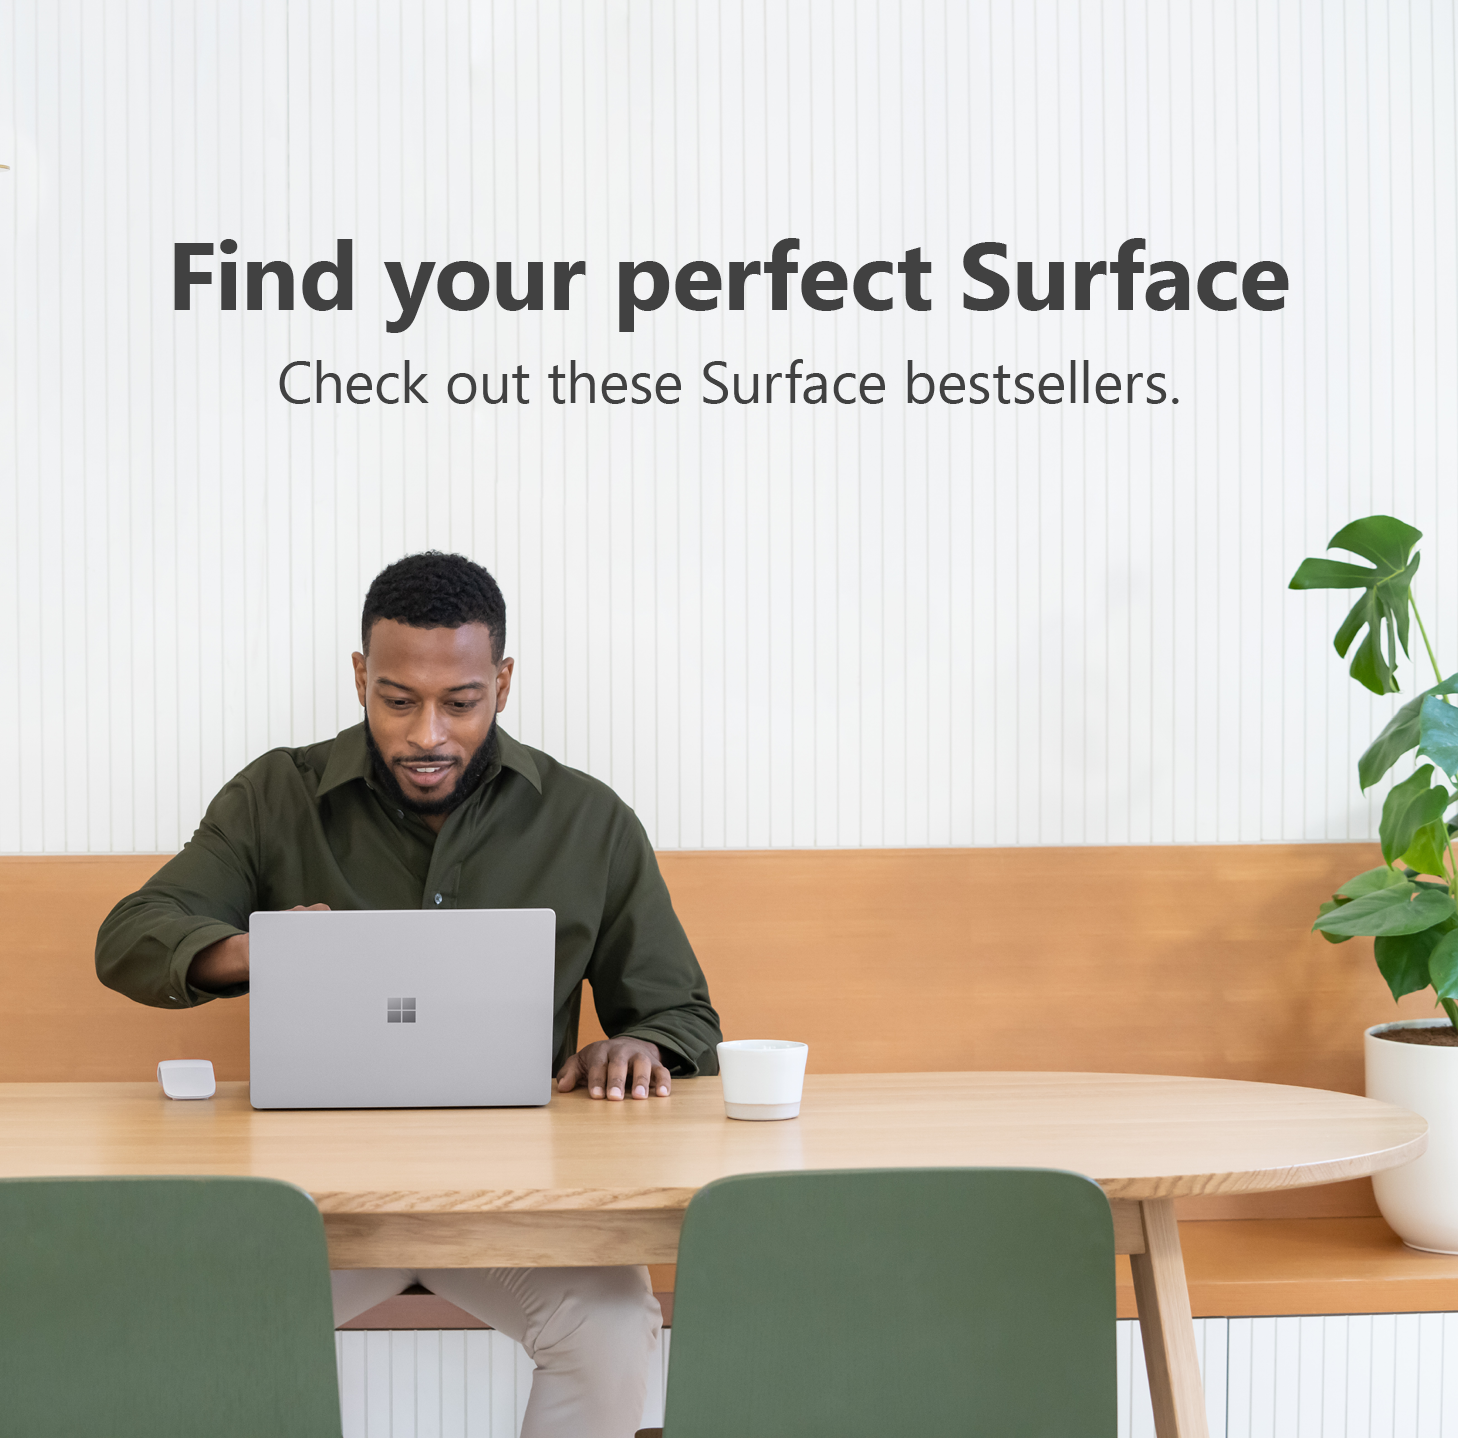 Find your perfect surface. Check out these surface bestsellers.